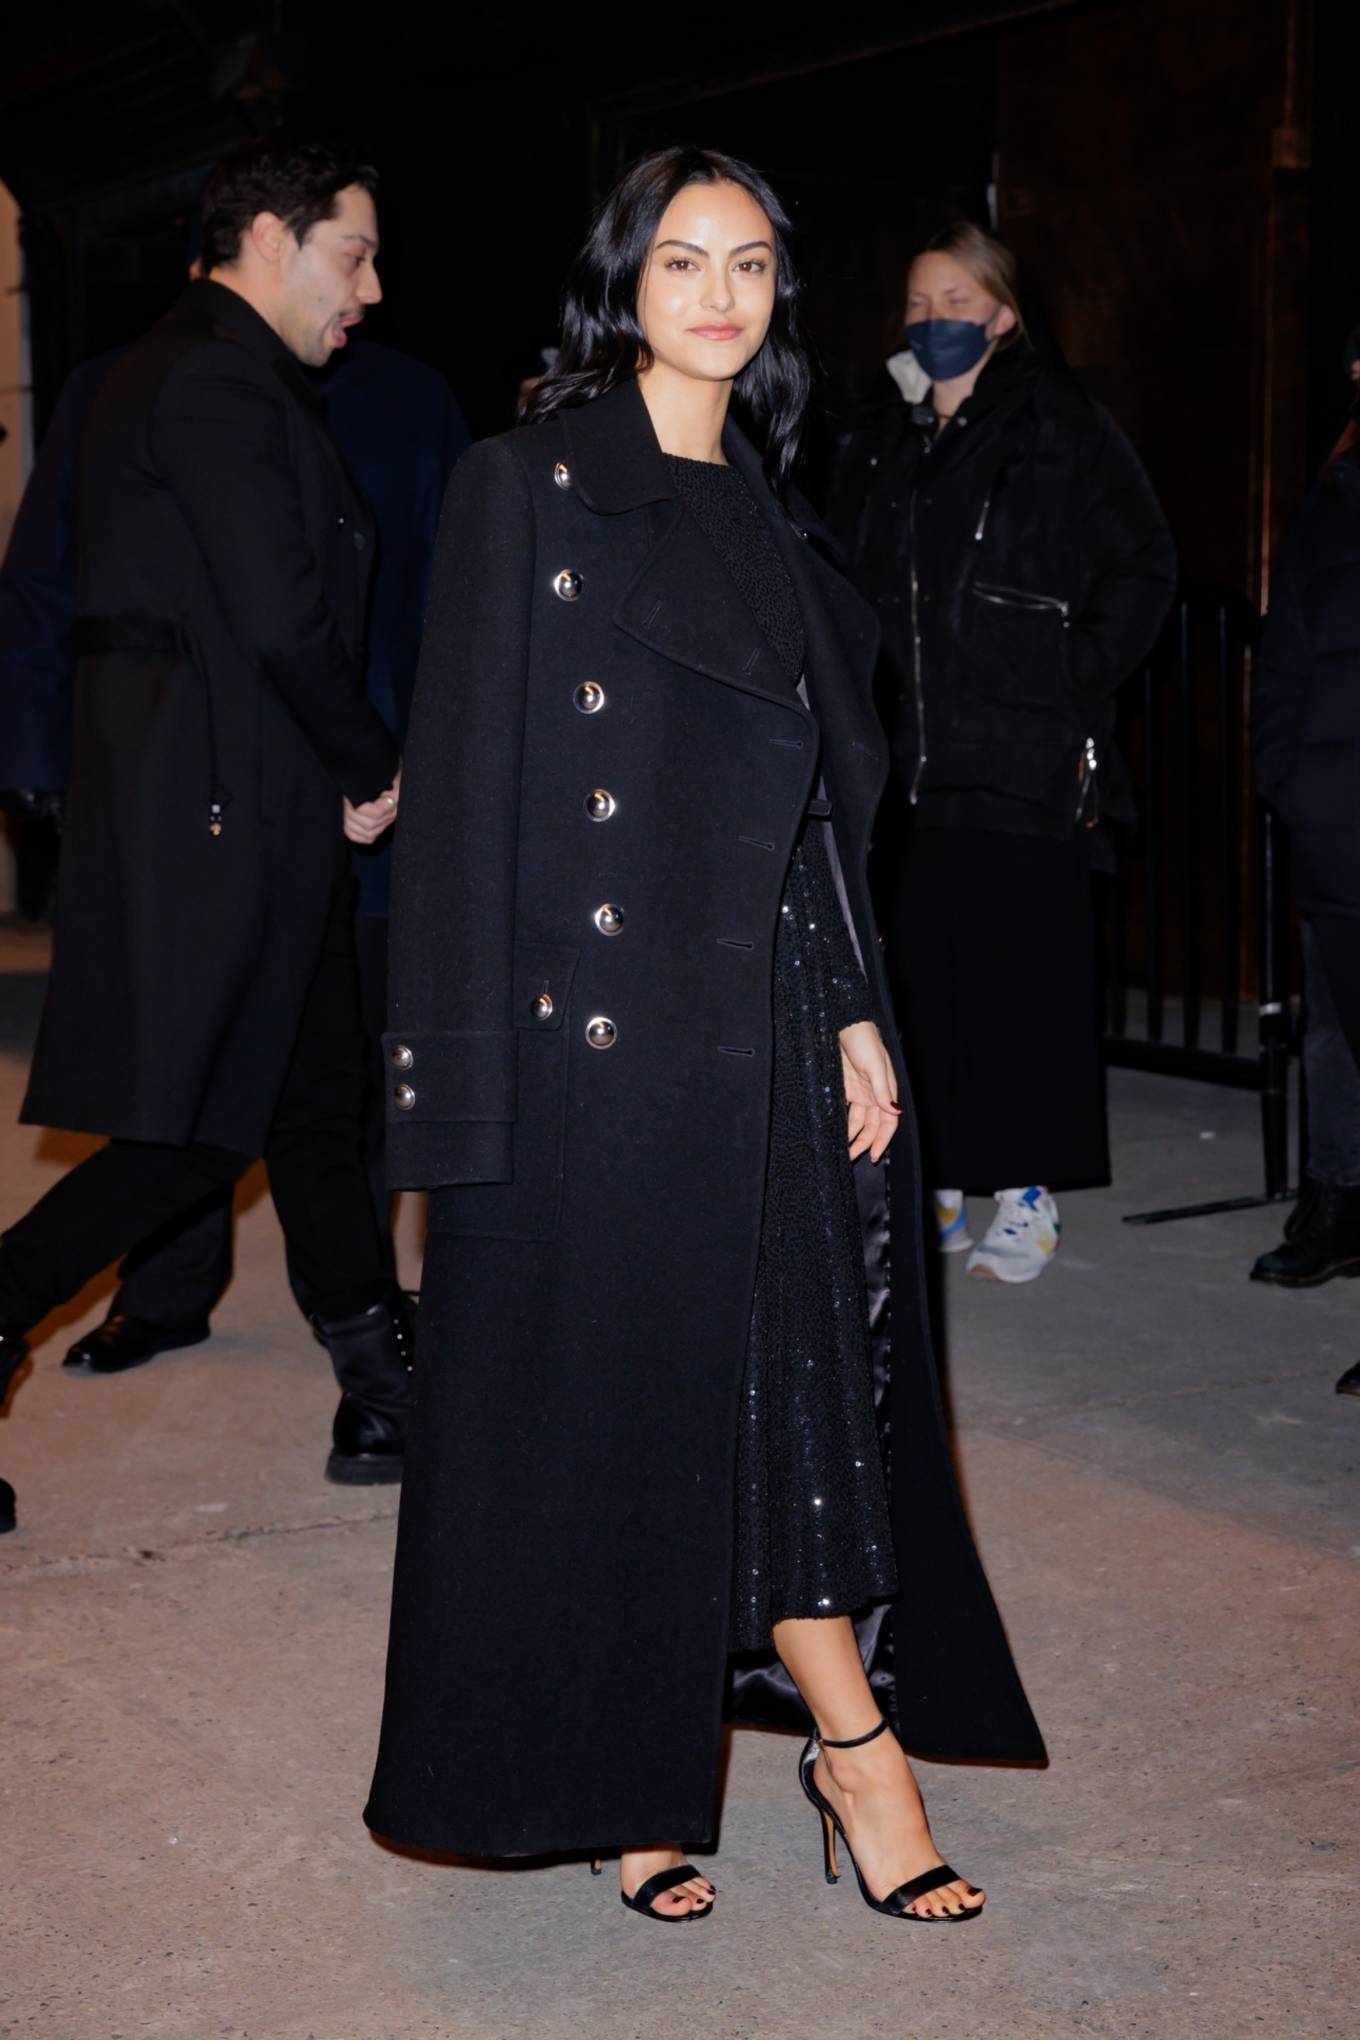 Camila Mendes 2022 : Camila Mendes – In all black arrives to the Michael Kors fashion show during NYFW-05